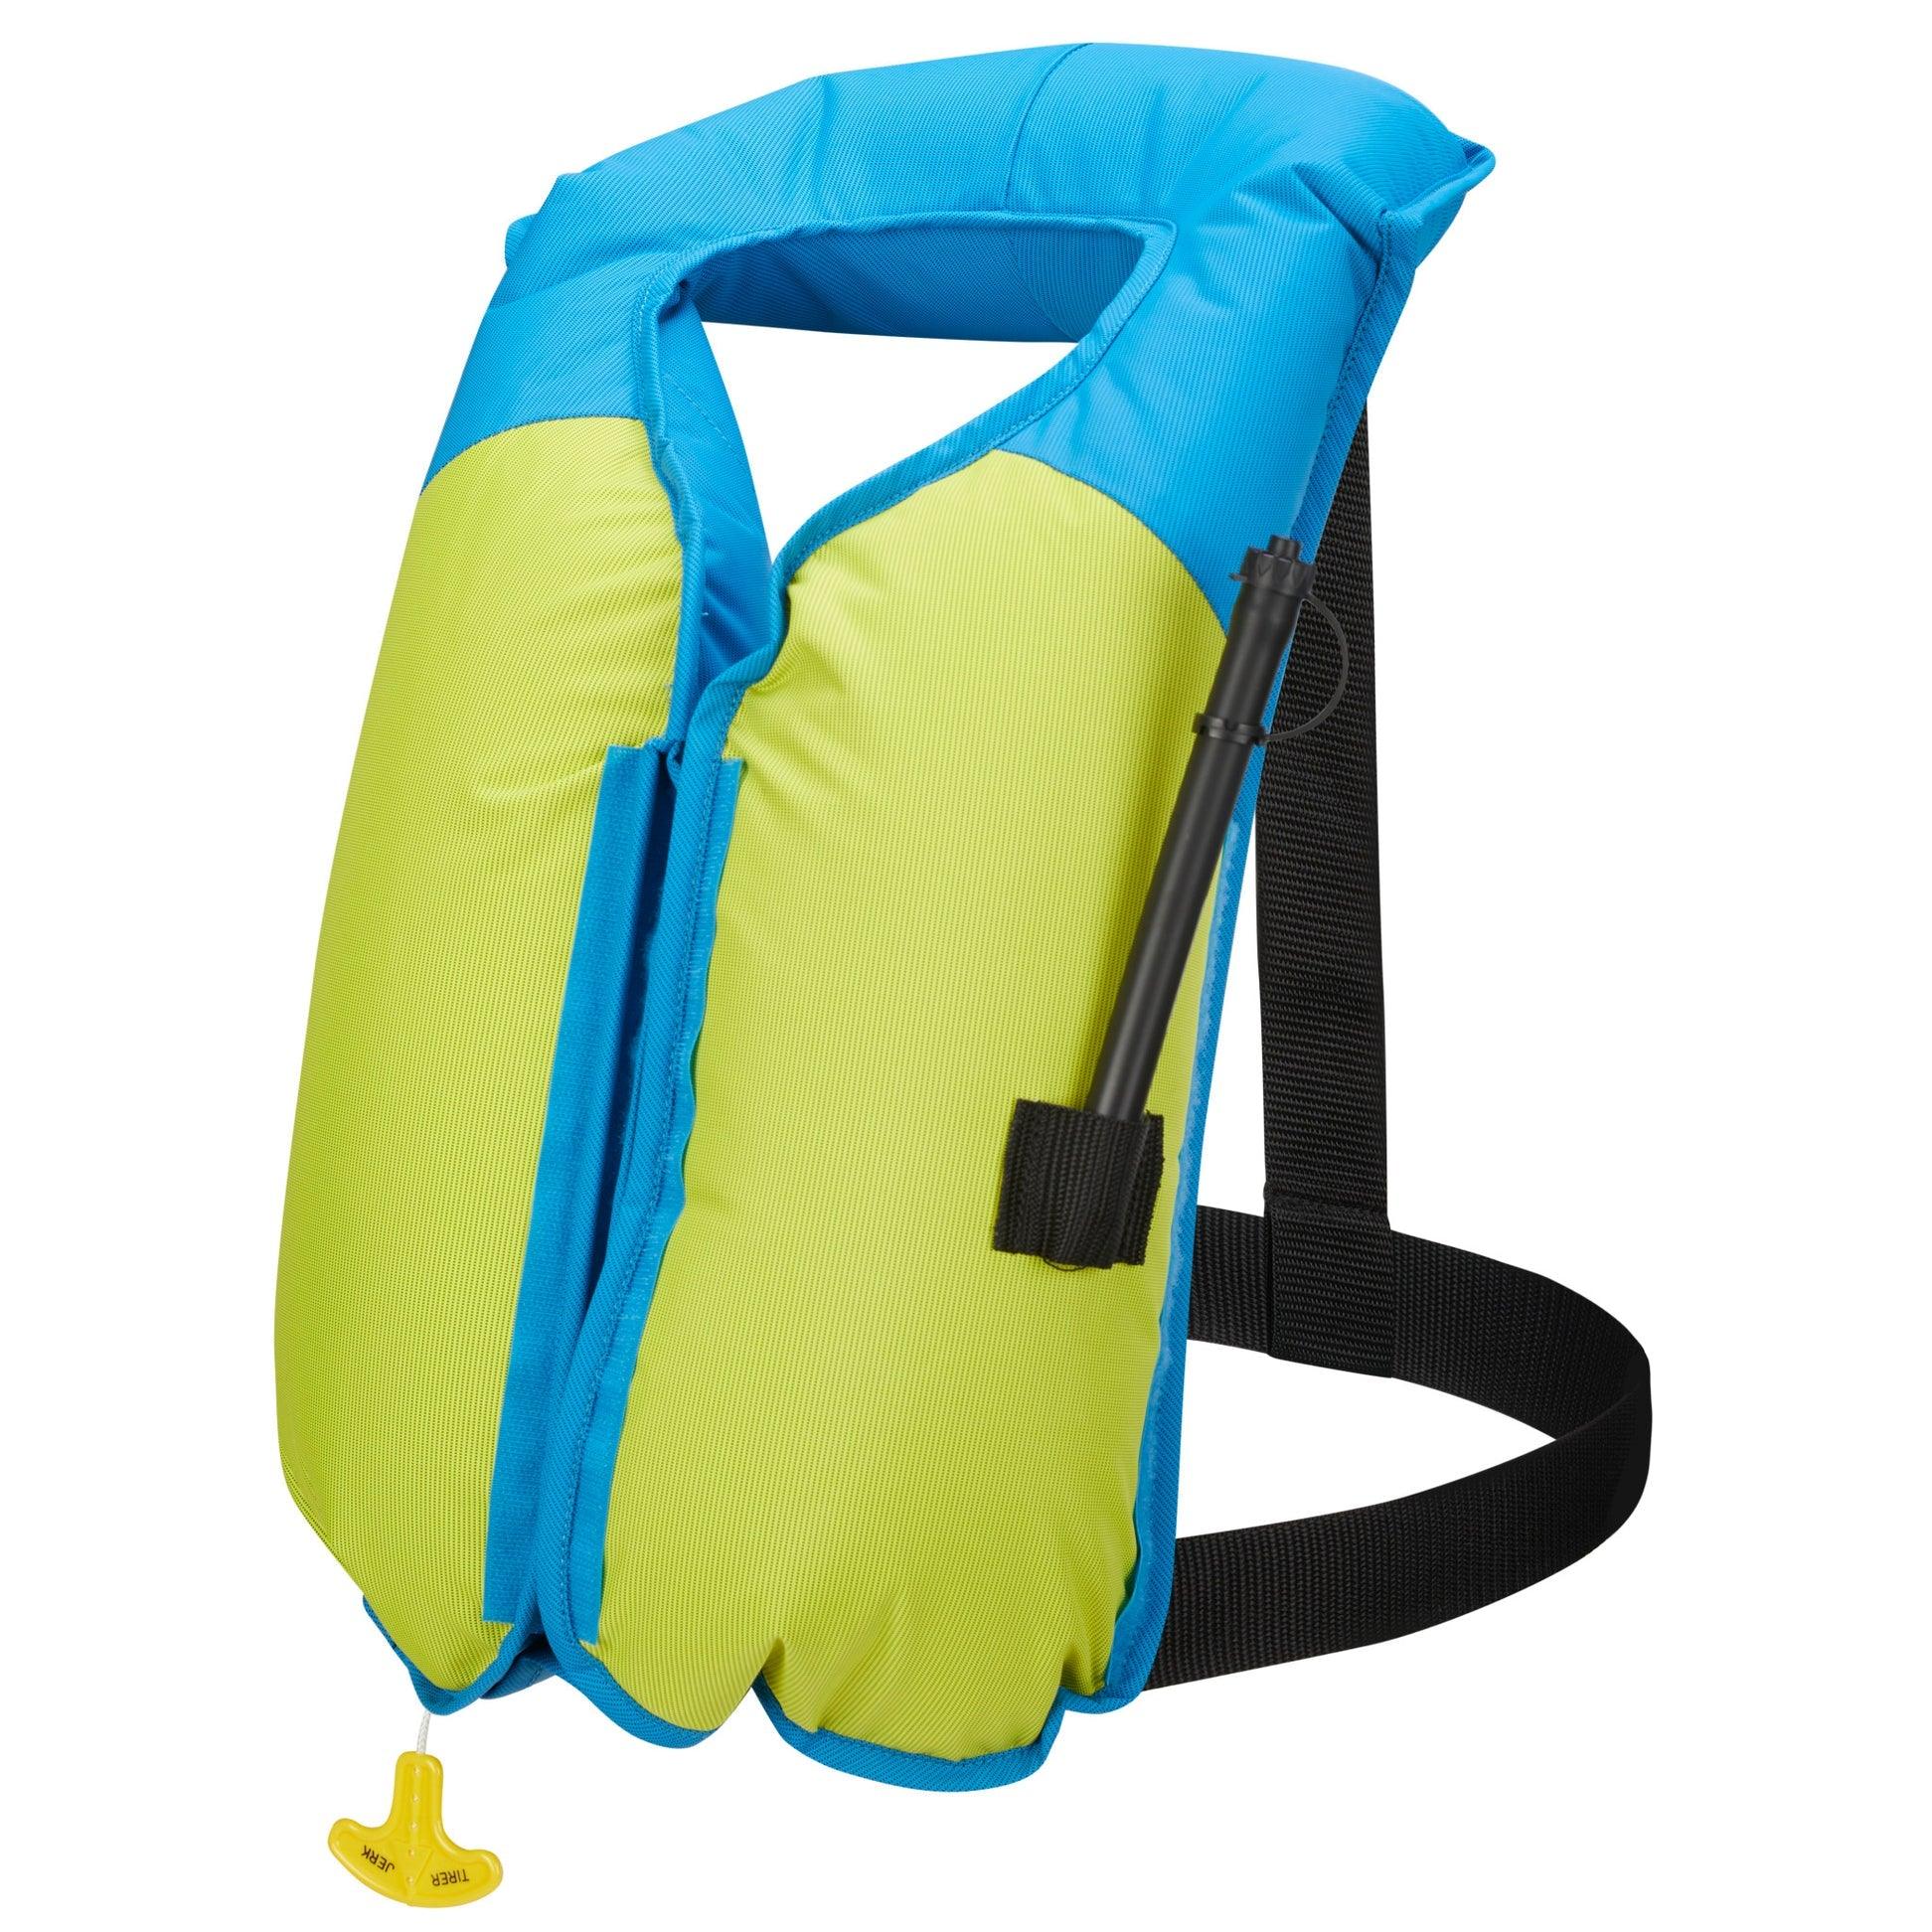 MIT 70 Manual Inflatable PFD - Canadian Board Company